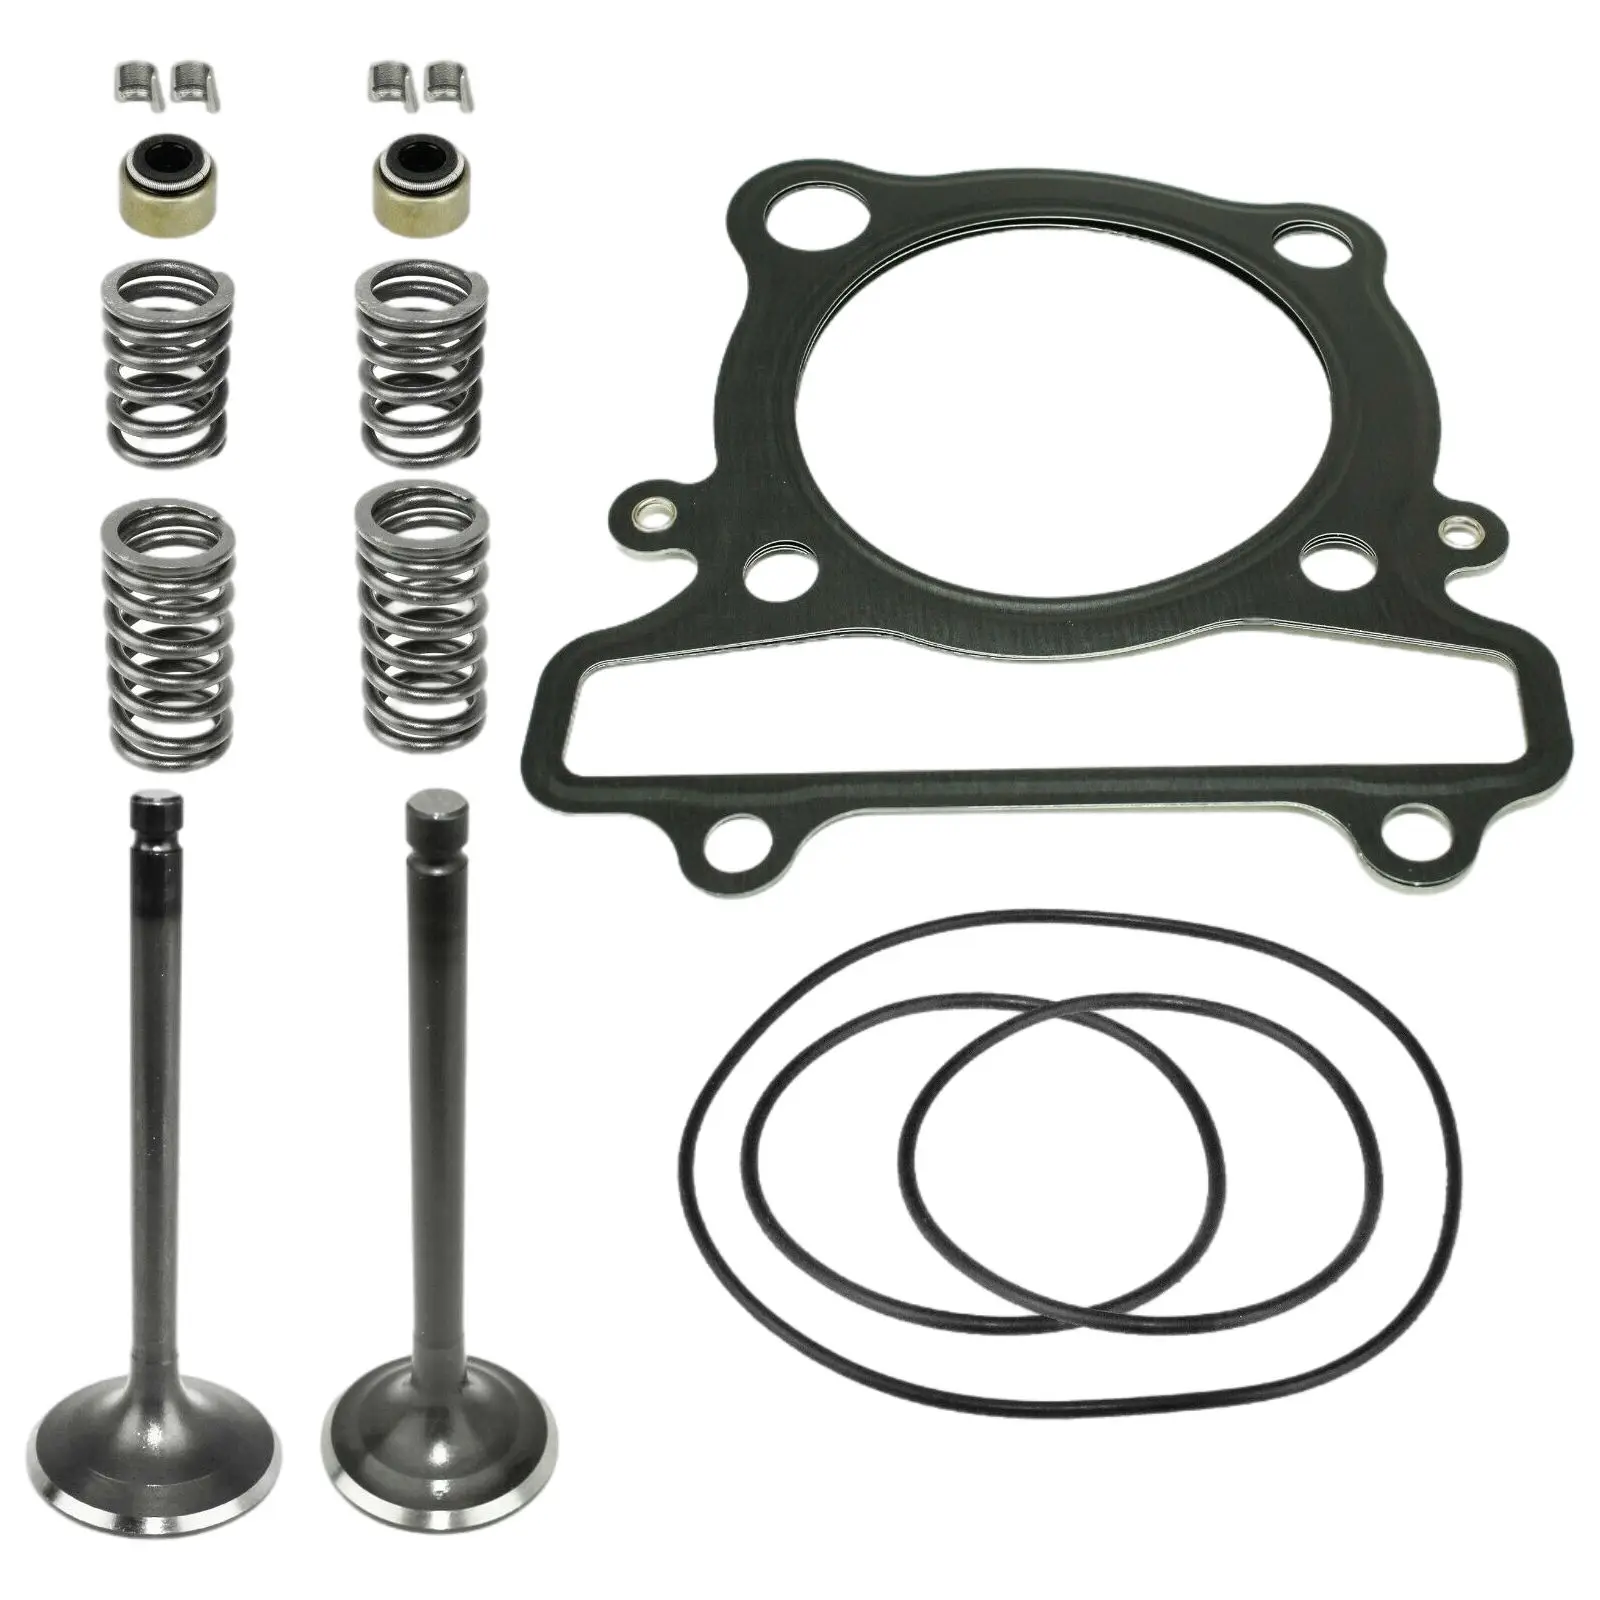 Cylinder Intake Exhaust Valve Gasket Kit CE0067XK117LL Fit for Yamaha 1987-04 Accessories 16Pcs